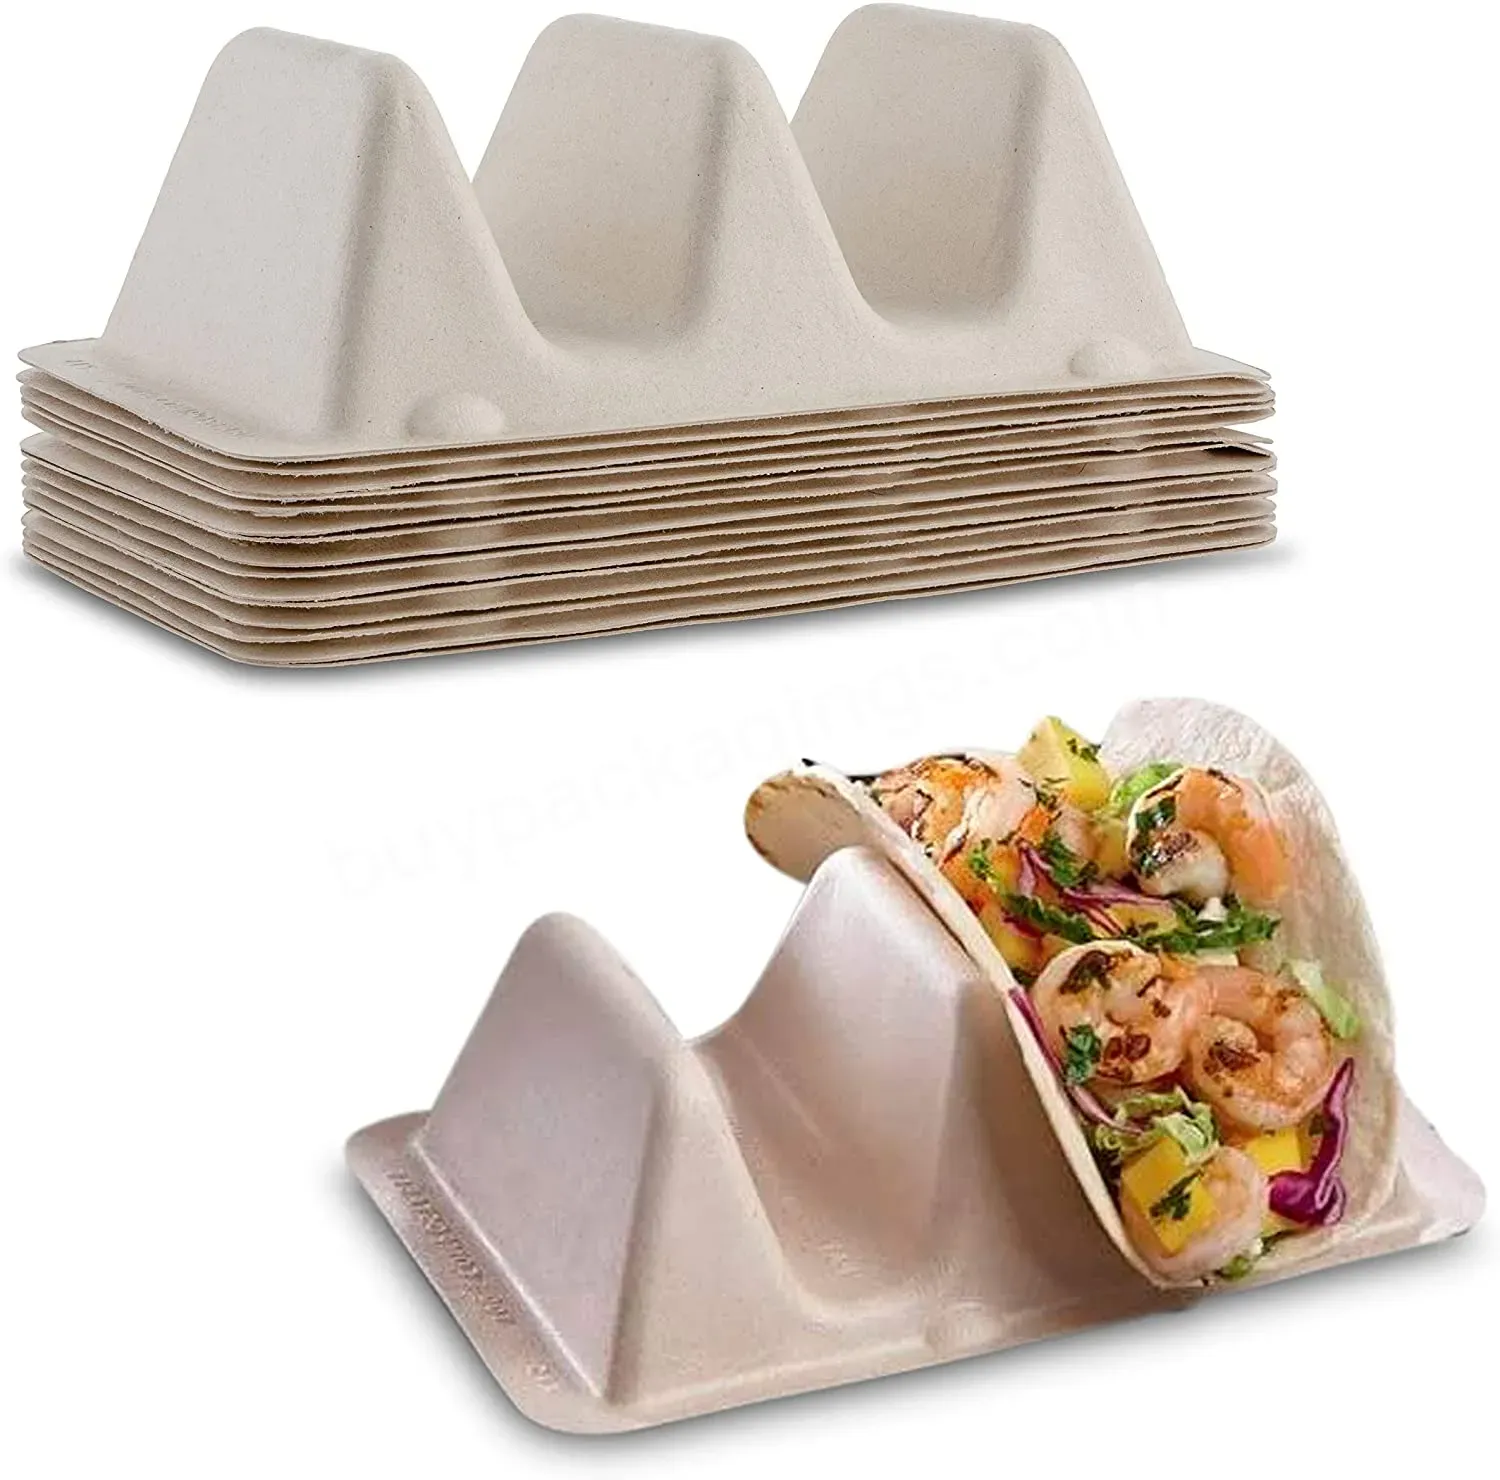 Pulp Fiber Taco Holder Or Stand Up Divider Perfect For Keeping Tacos In Place Disposable Paper Products - Buy Food Holder,Taco Holder,Cookie Paper Box Divider.